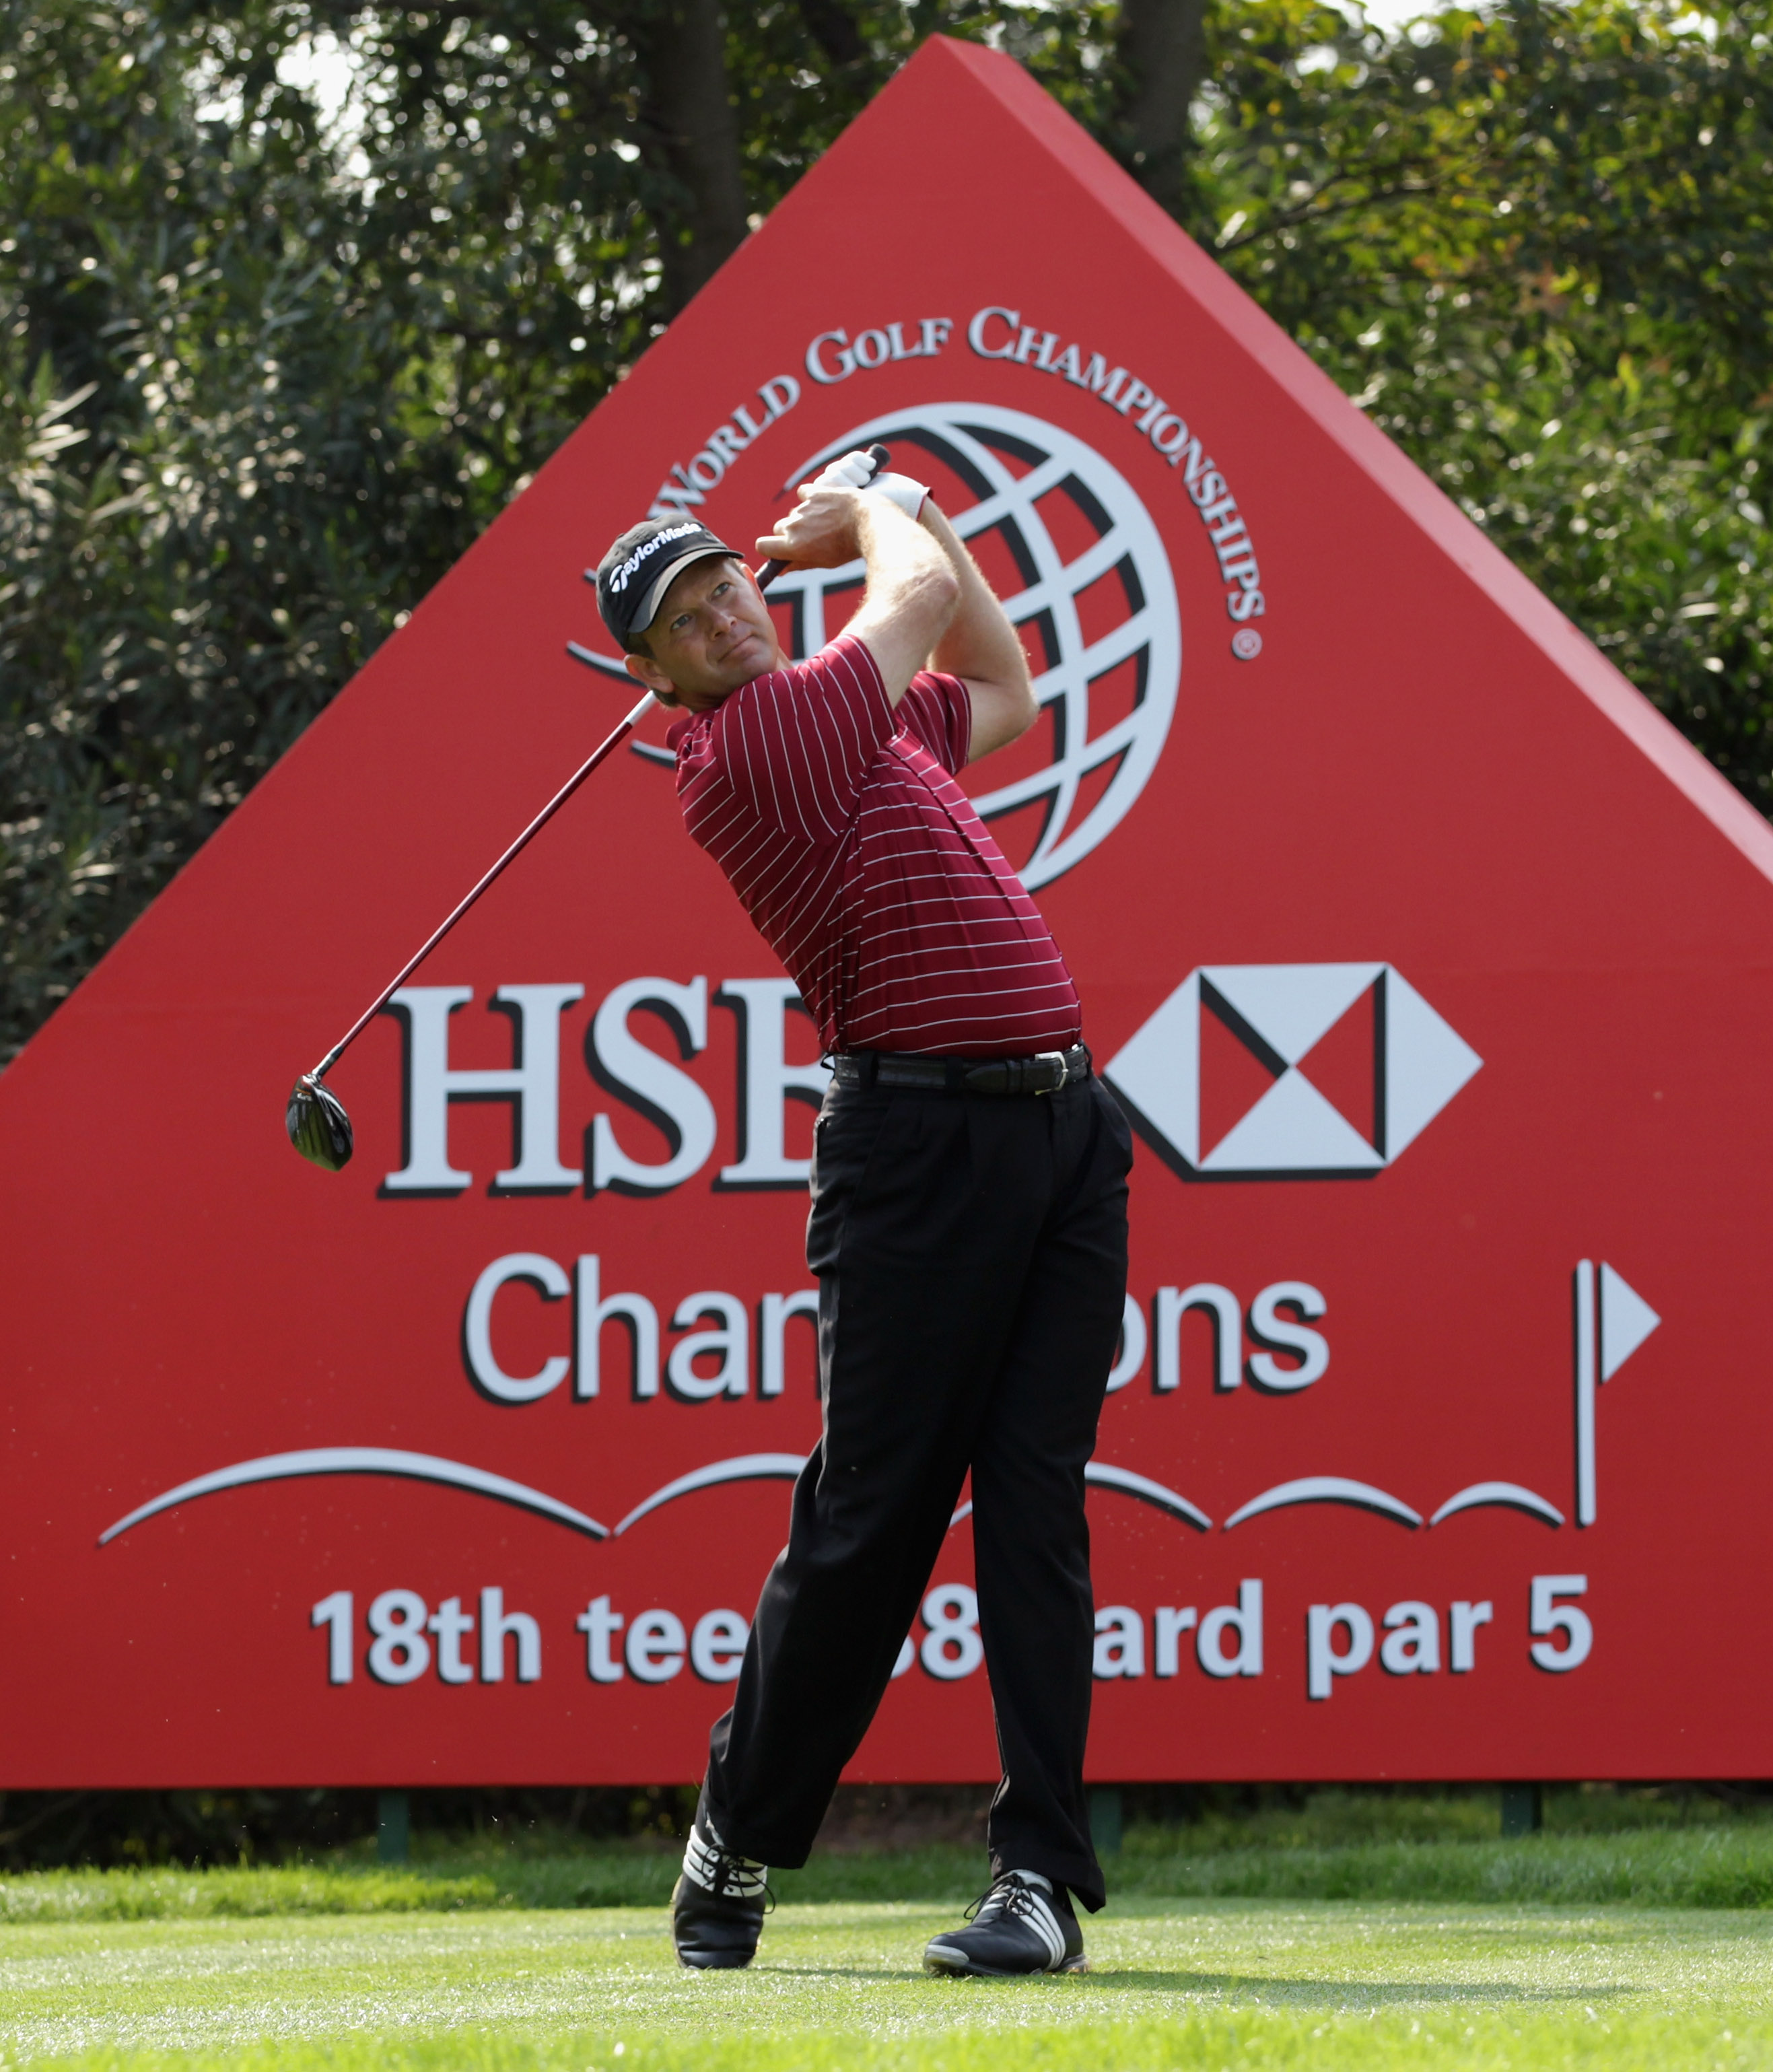 SHANGHAI, CHINA - NOVEMBER 04:  Retief Goosen of South Africa hits his tee-shot on the 18th hole during the first round of the WGC-HSBC Champions at Sheshan International Golf Club on November 4, 2010 in Shanghai, China.  (Photo by Andrew Redington/Getty